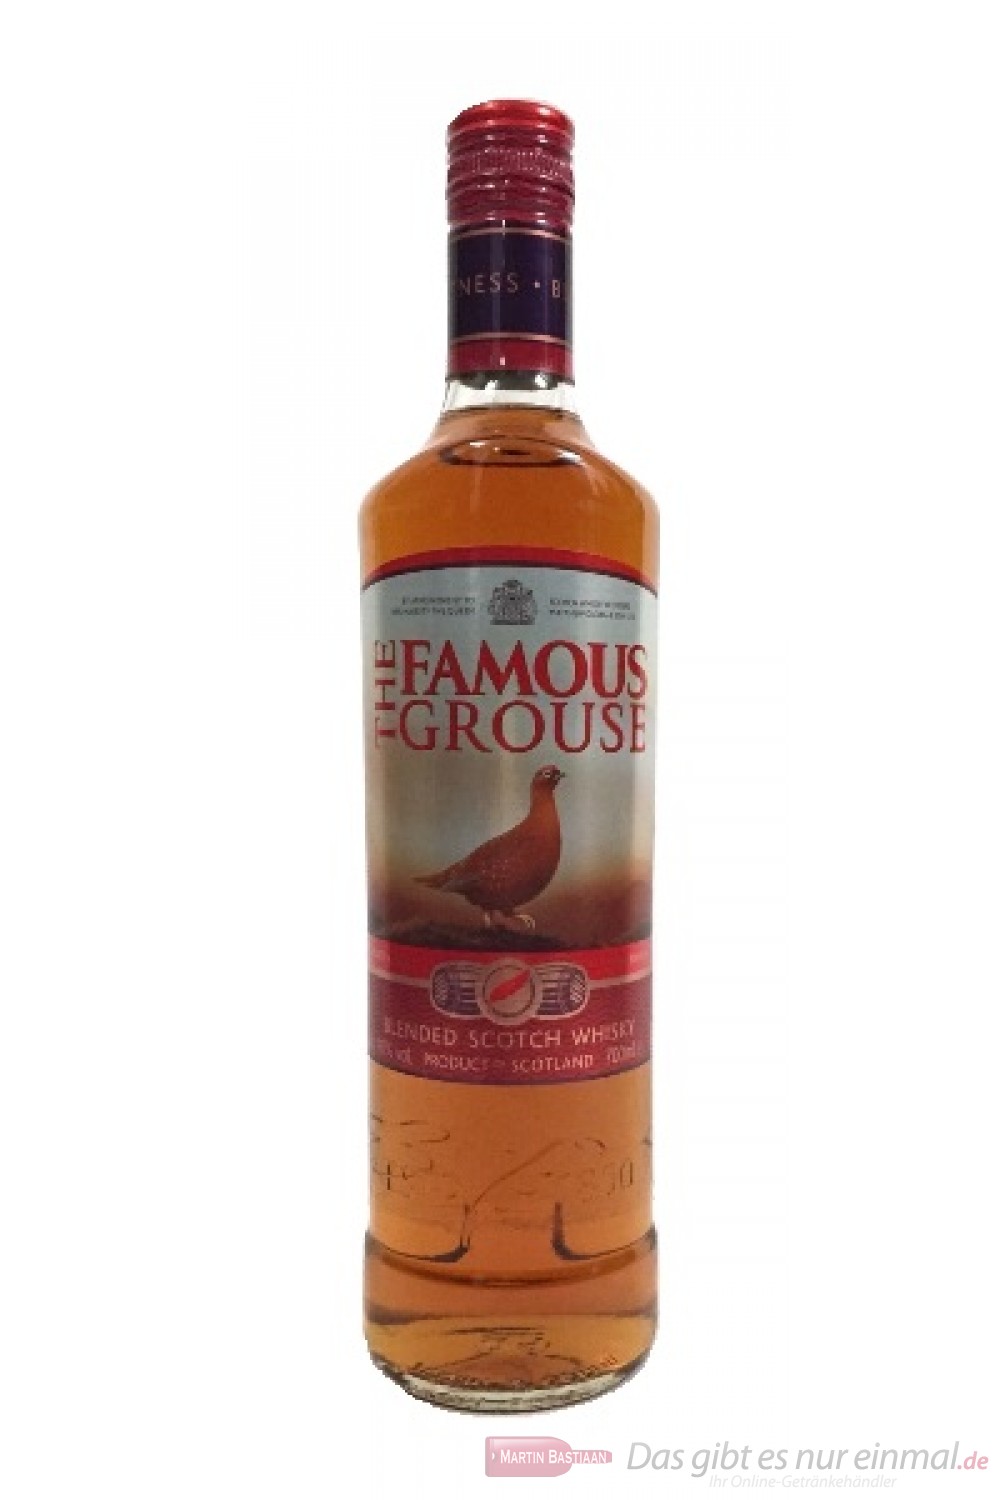 The Famous Grouse Port Wood Finish